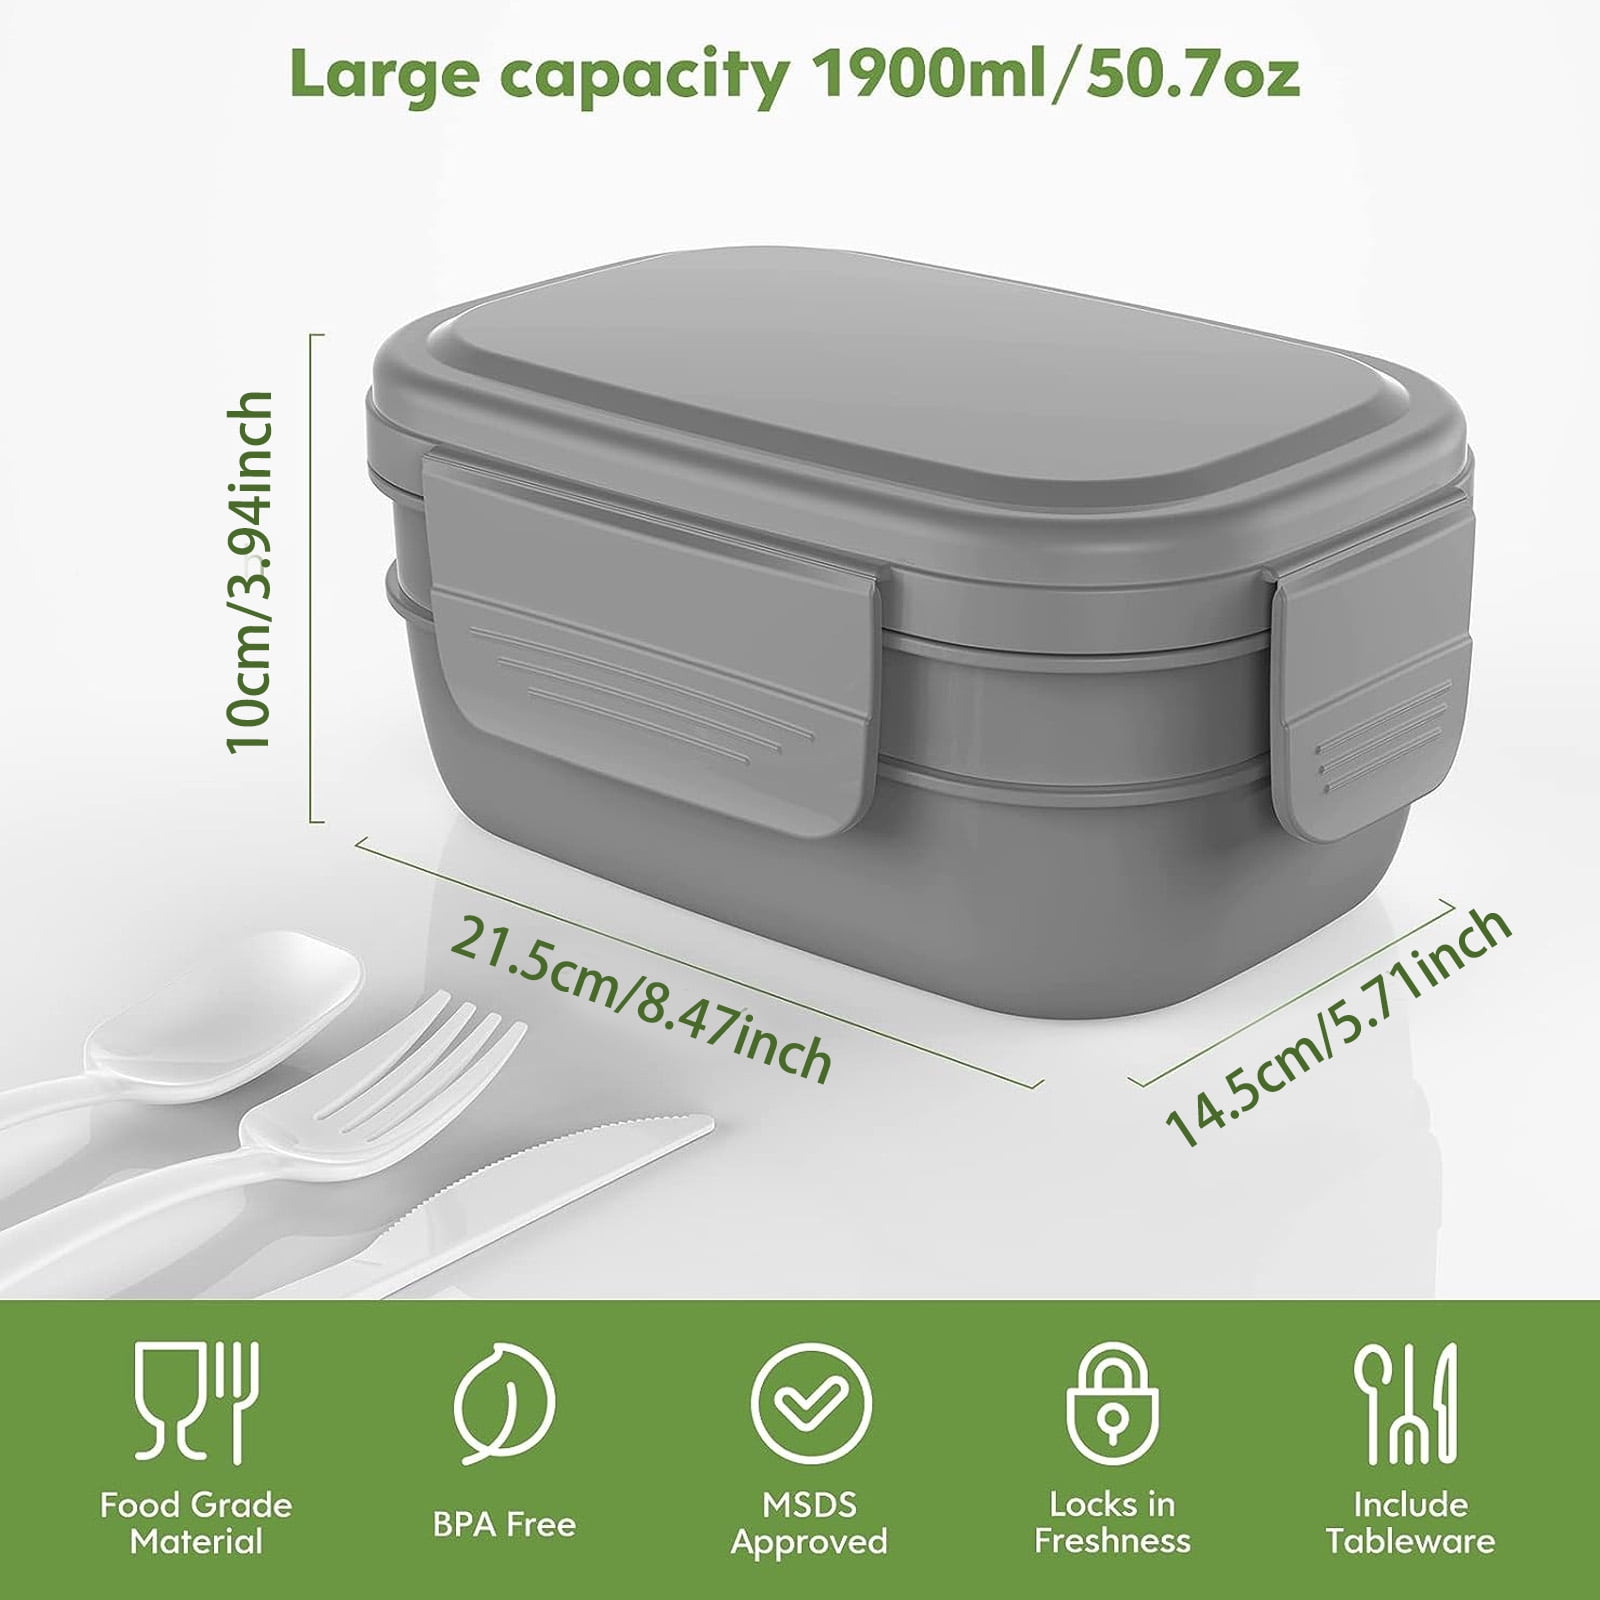 shopwithgreen 54 OZ to Go Salad Lunch Container, BPA-Free, 2-Compartment  for Salad Toppings and Snacks, Salad Bowl with Dressing Container, Built-in